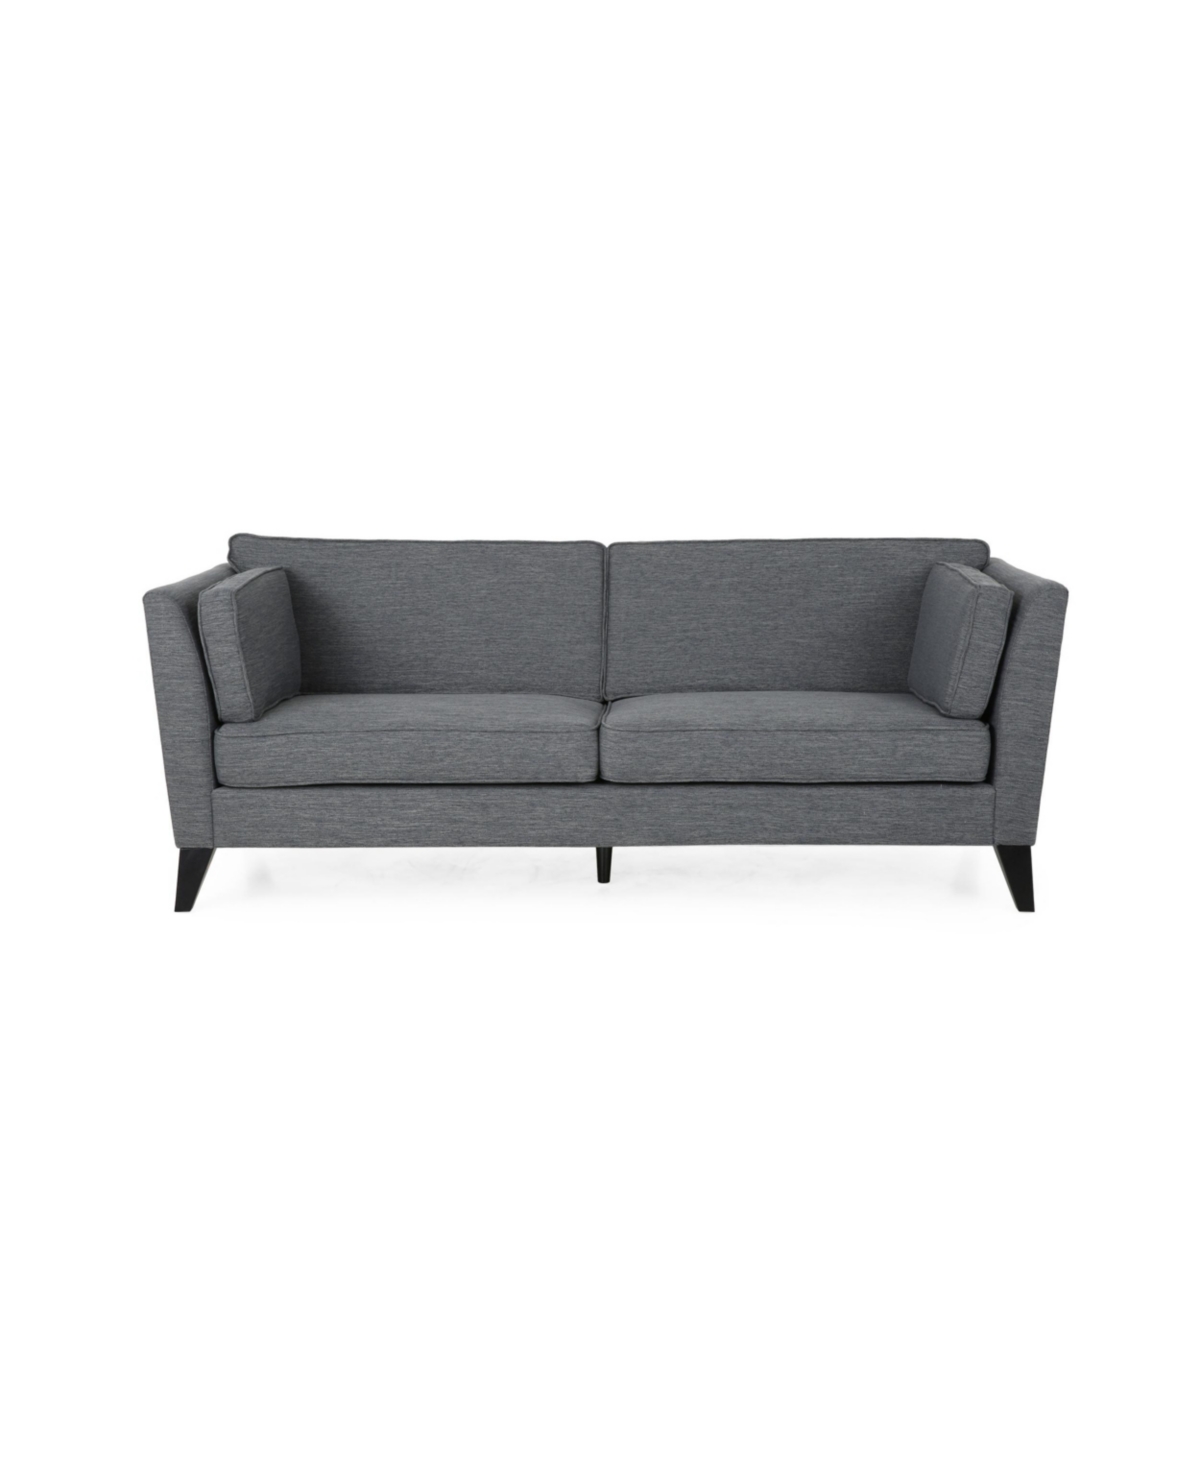 Noble House Bryford Contemporary 3 Seater Sofa In Charcoal